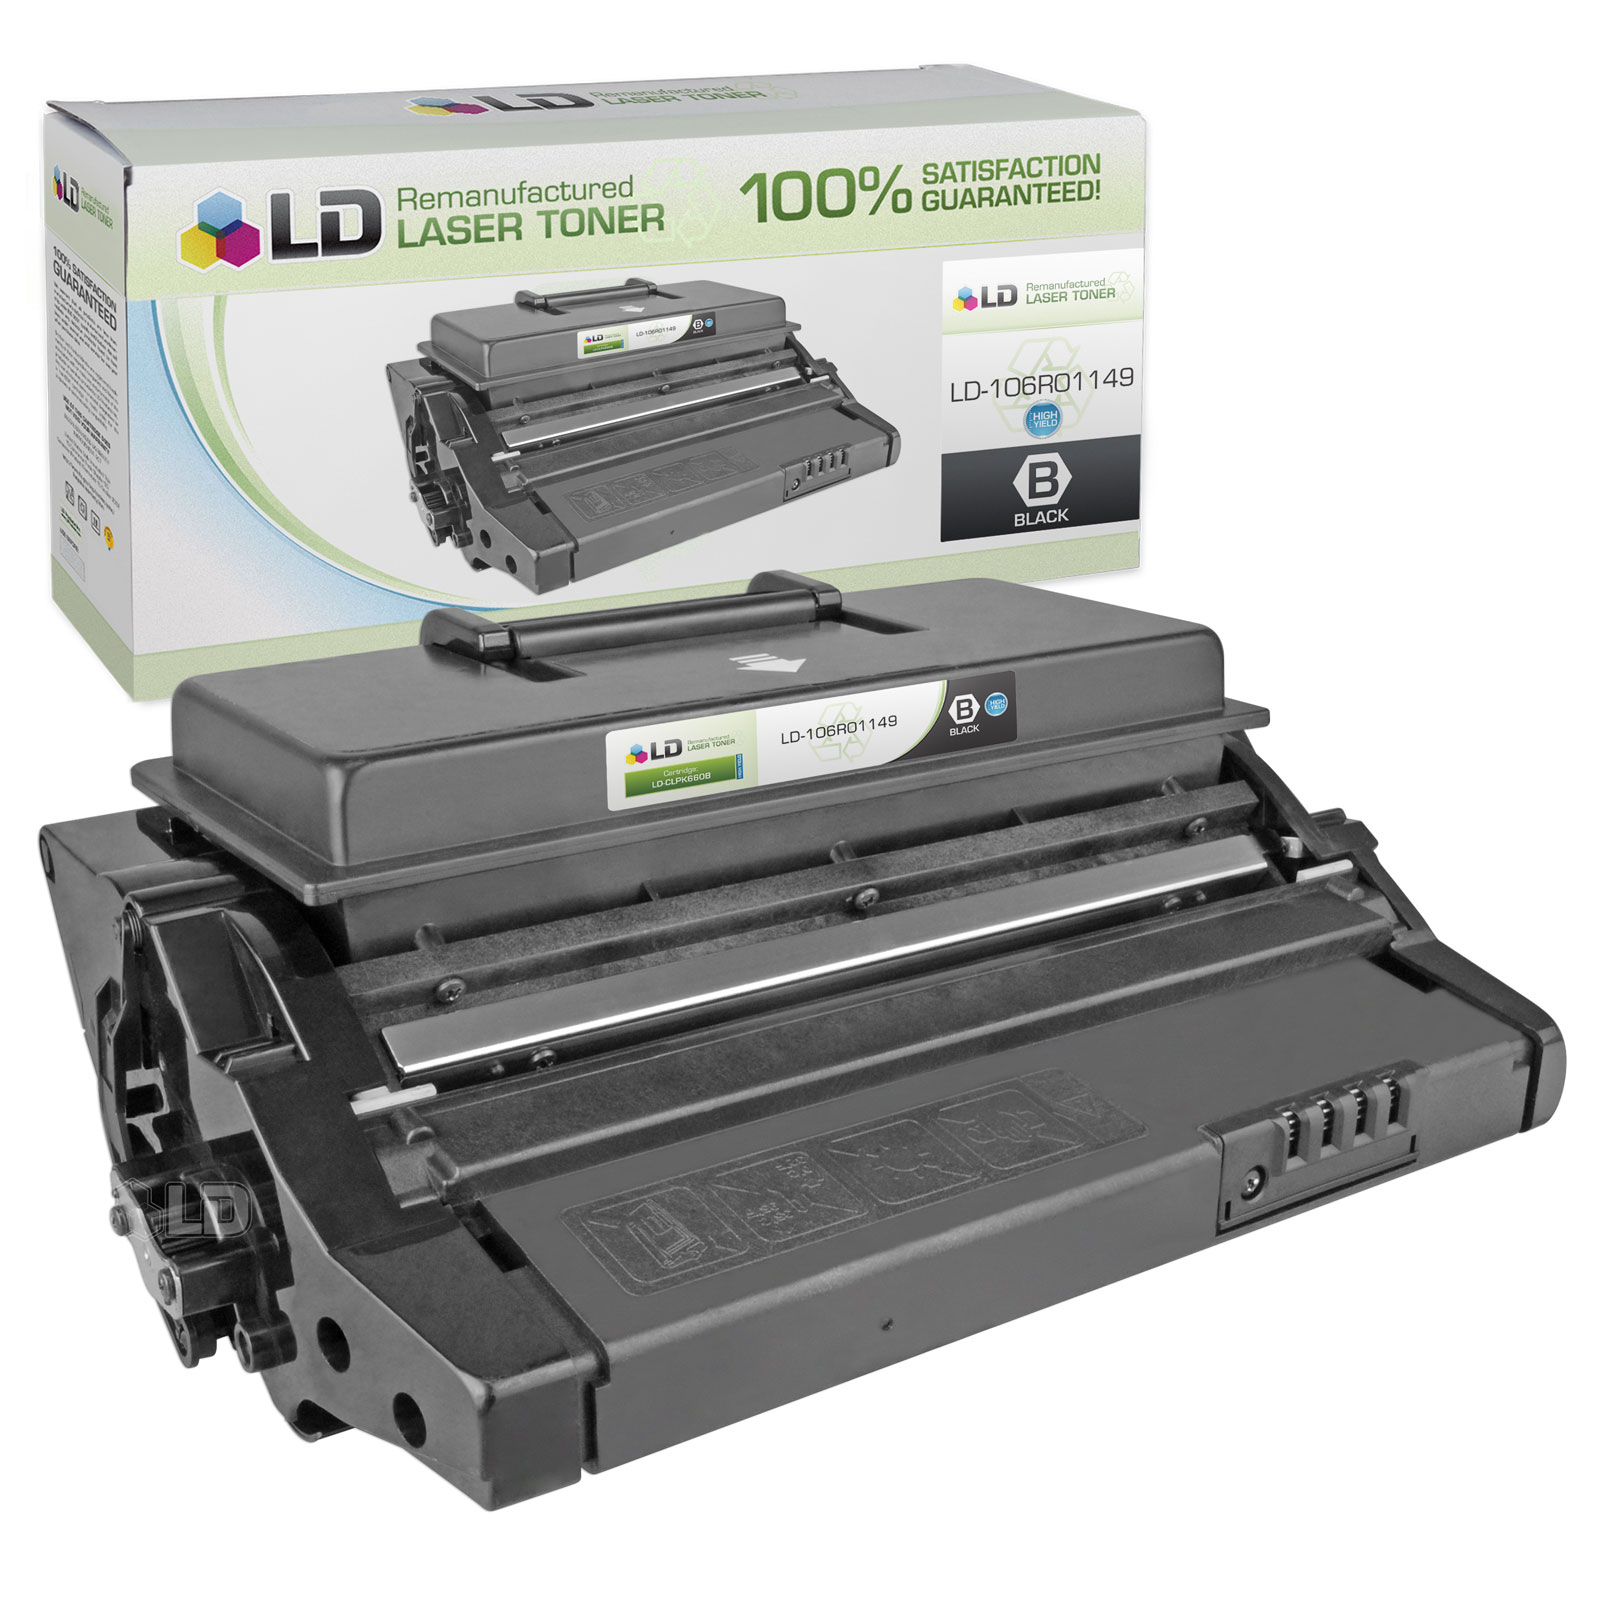 LD Compatible Xerox 106R01149 High Yield Black Laser Toner Cartridge for Phaser 3500 - image 1 of 1